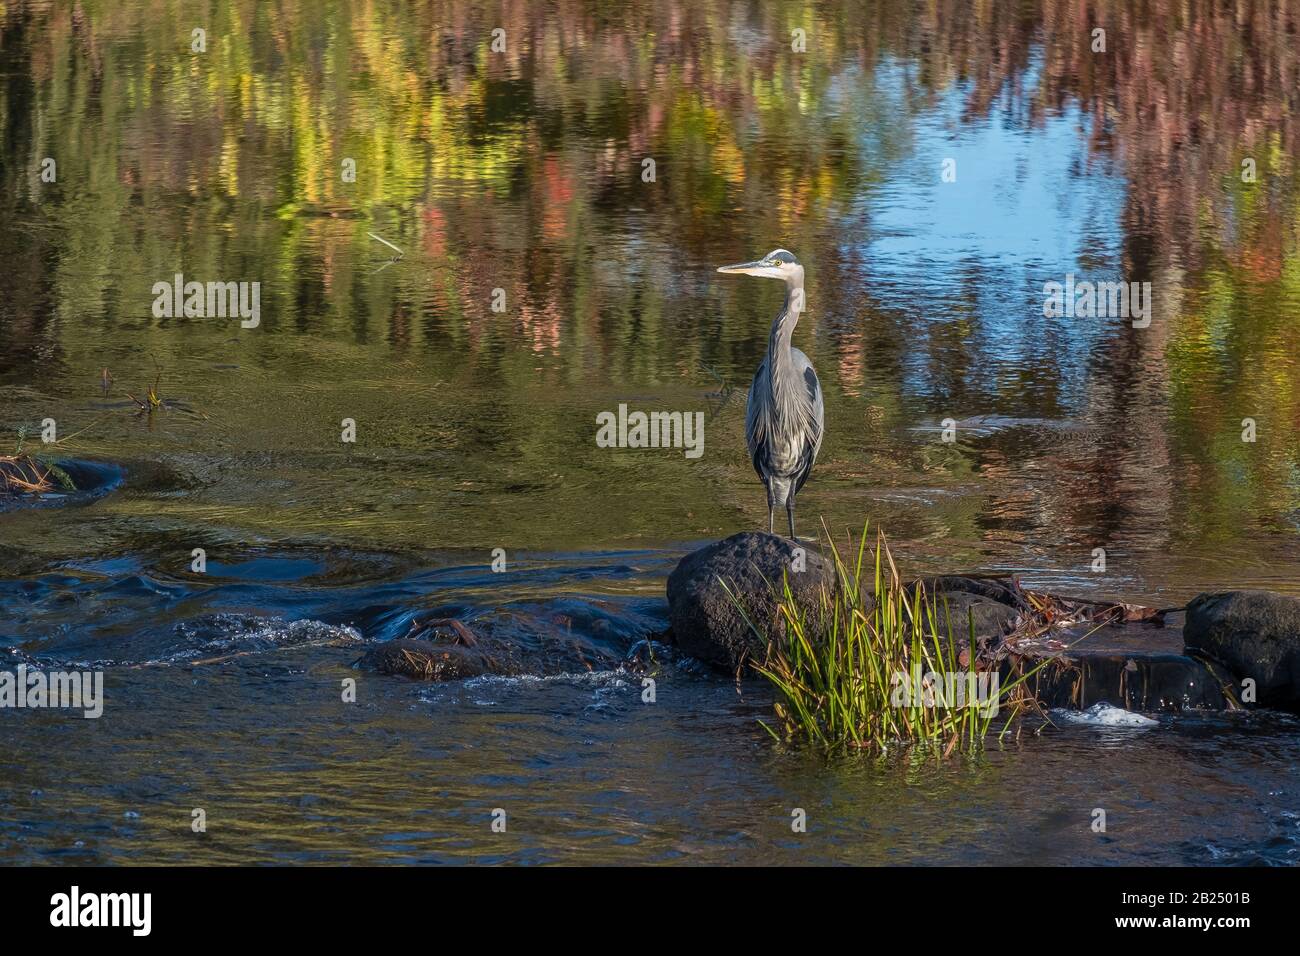 A great blue heron in the Millers River Stock Photo